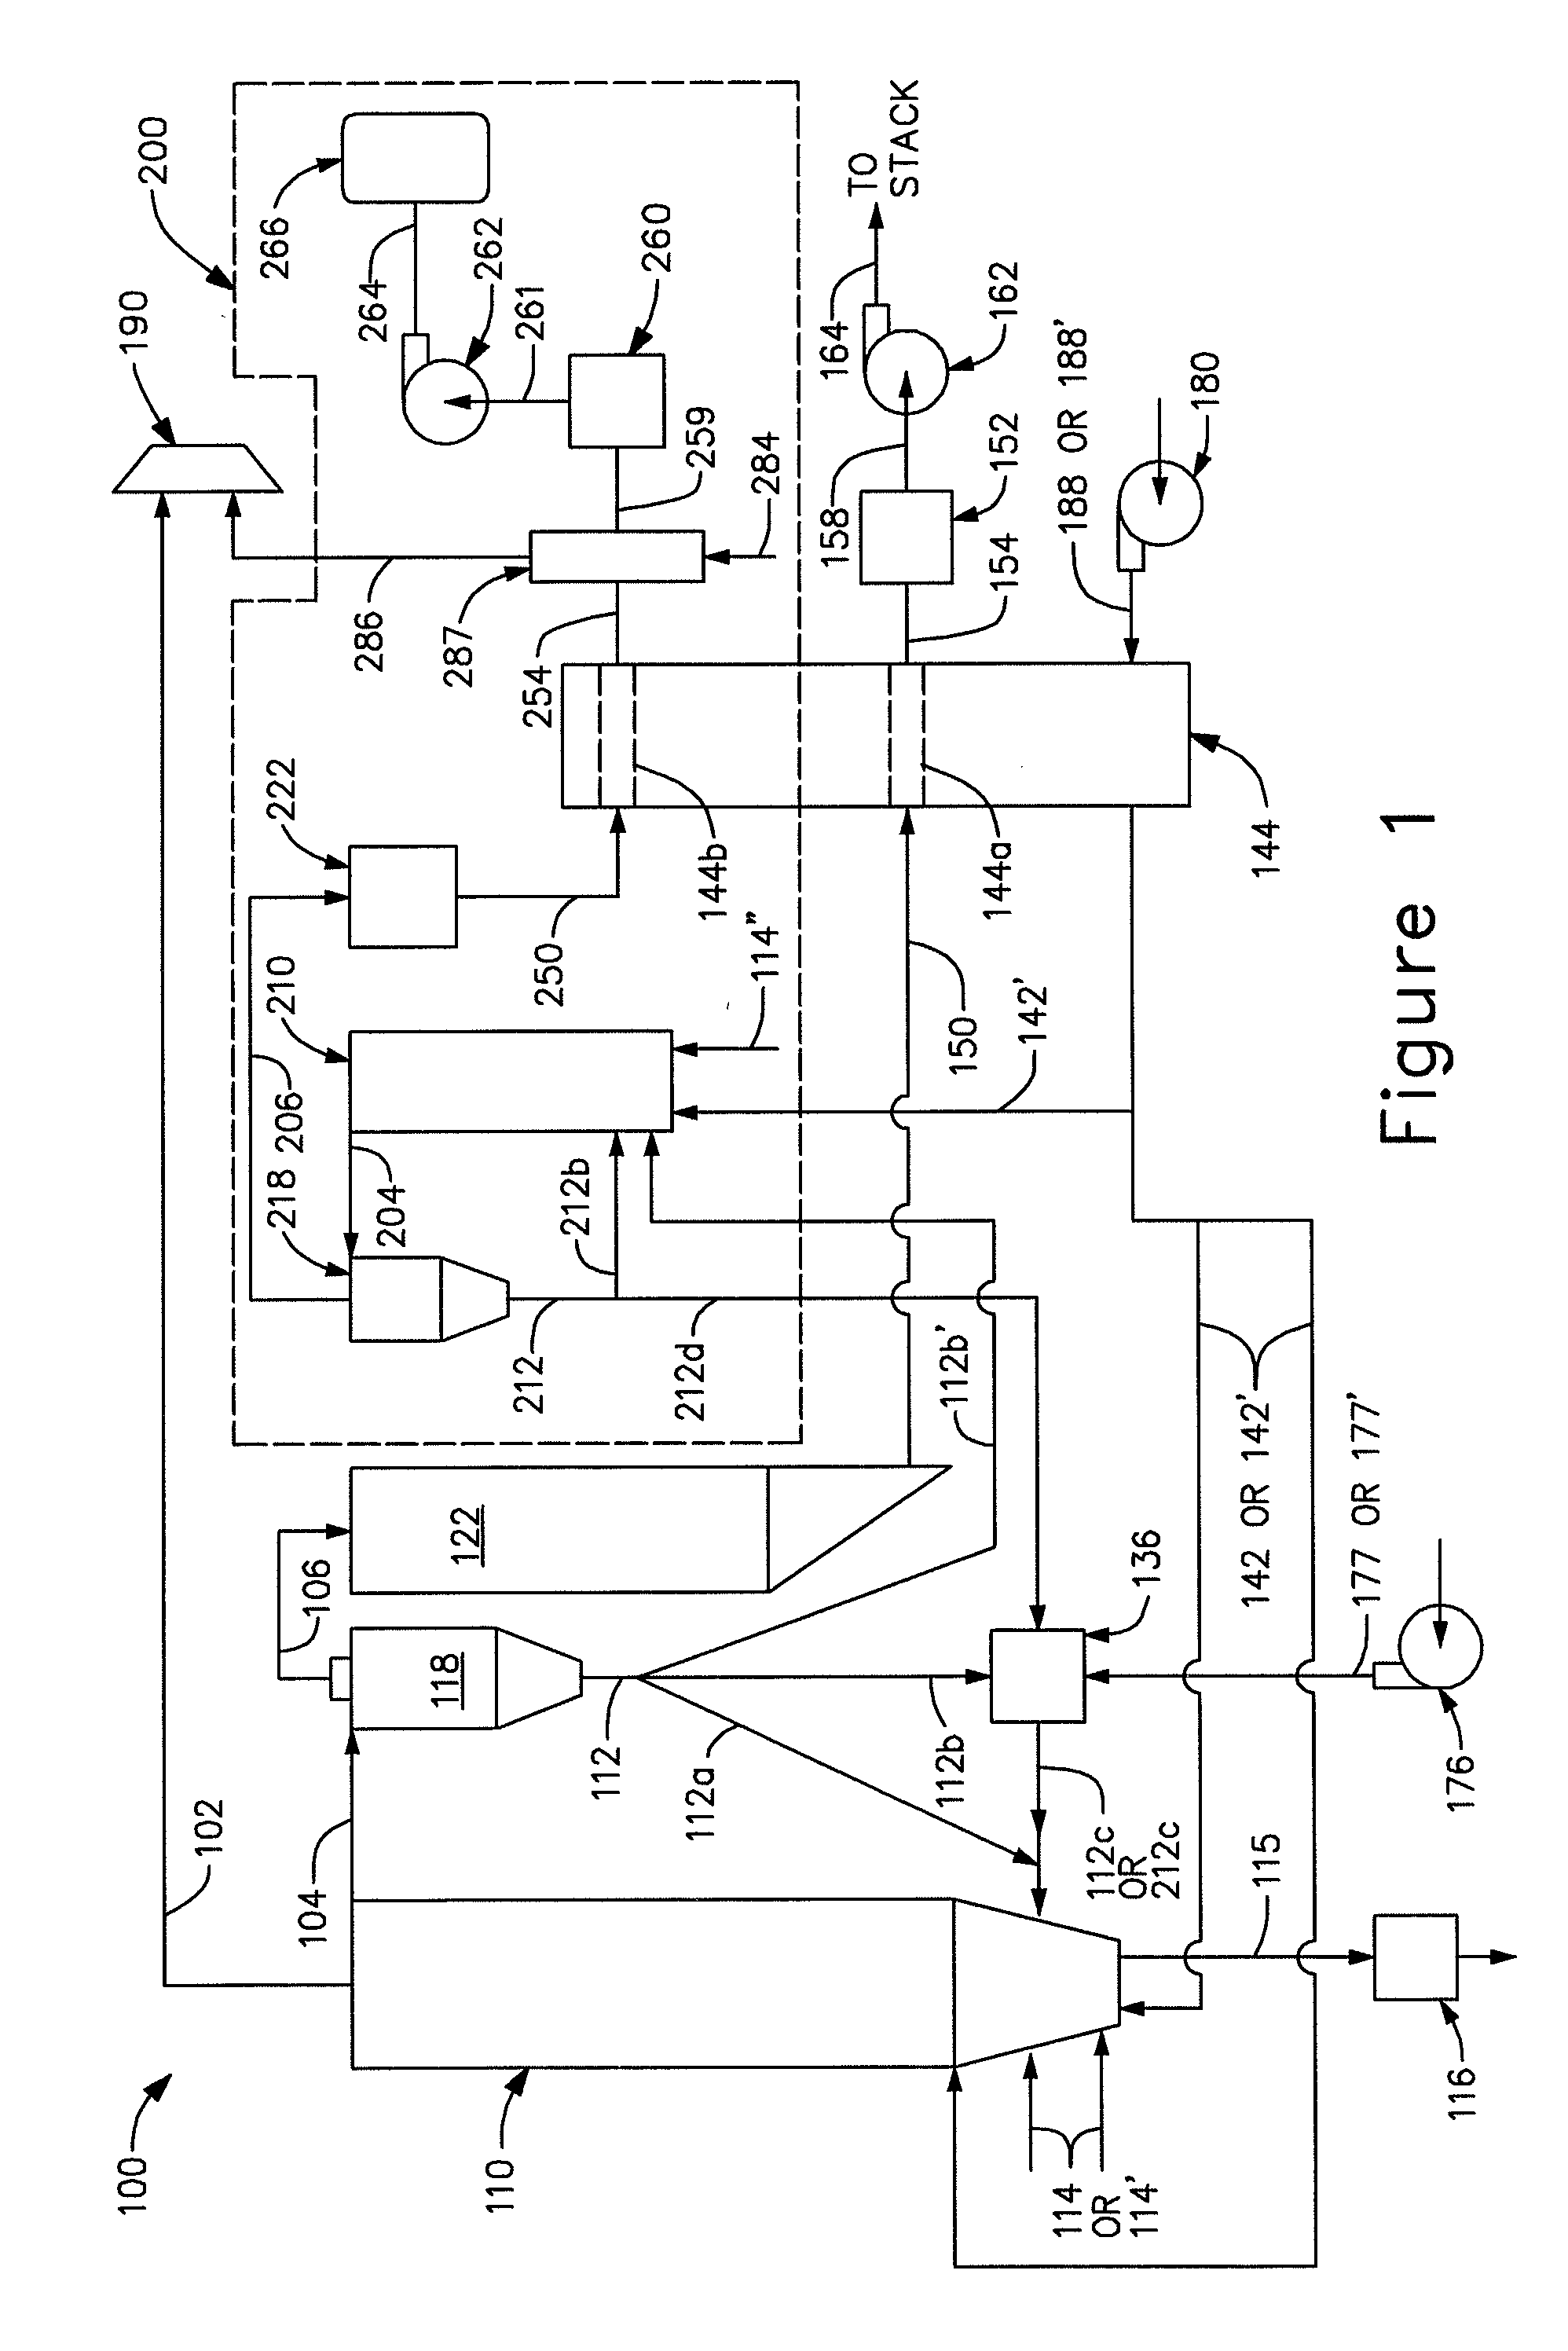 Air-fired co2 capture ready circulating fluidized bed heat generation with a reactor subsystem